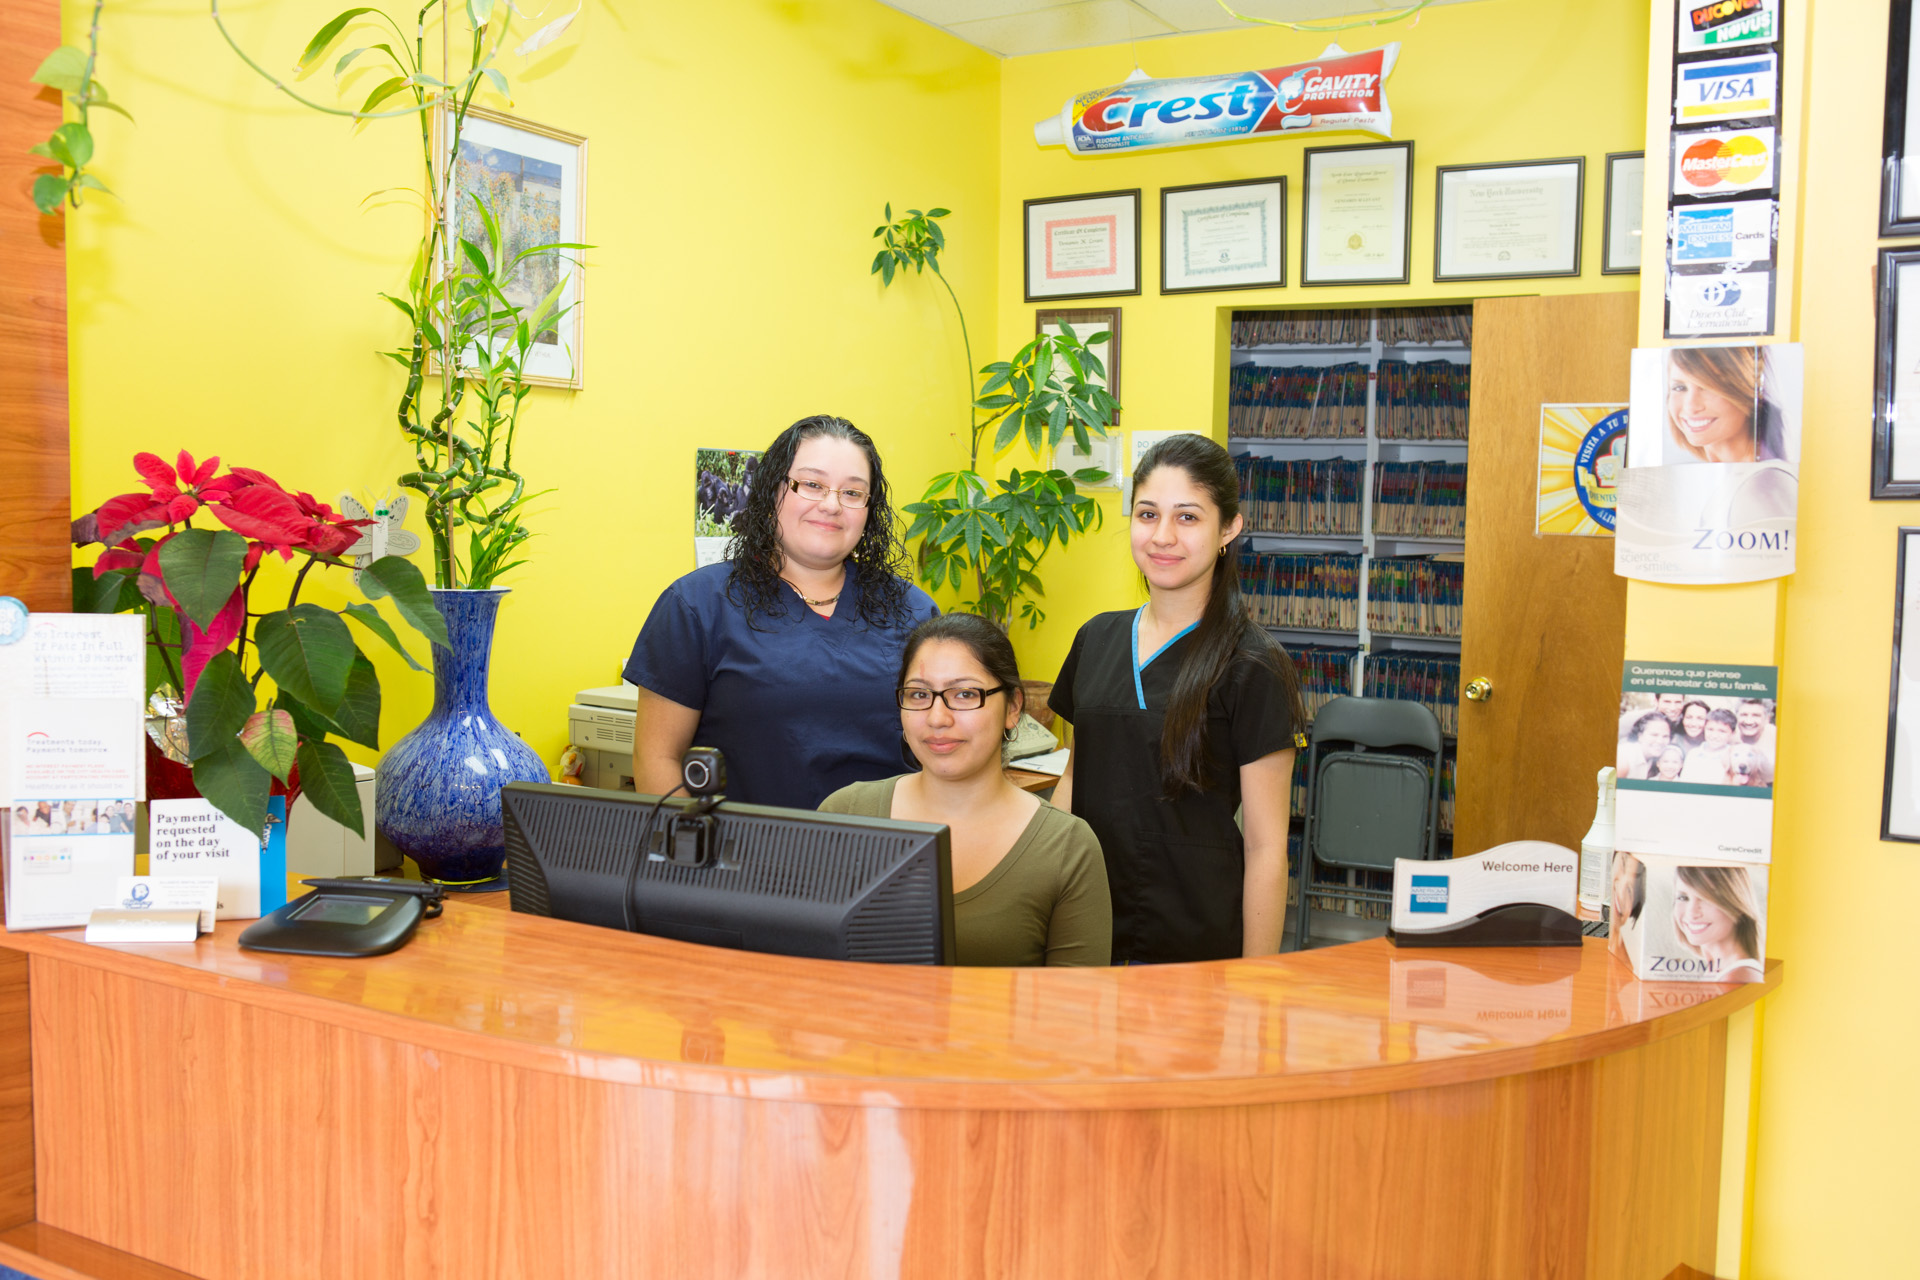 Our Friendly office staff